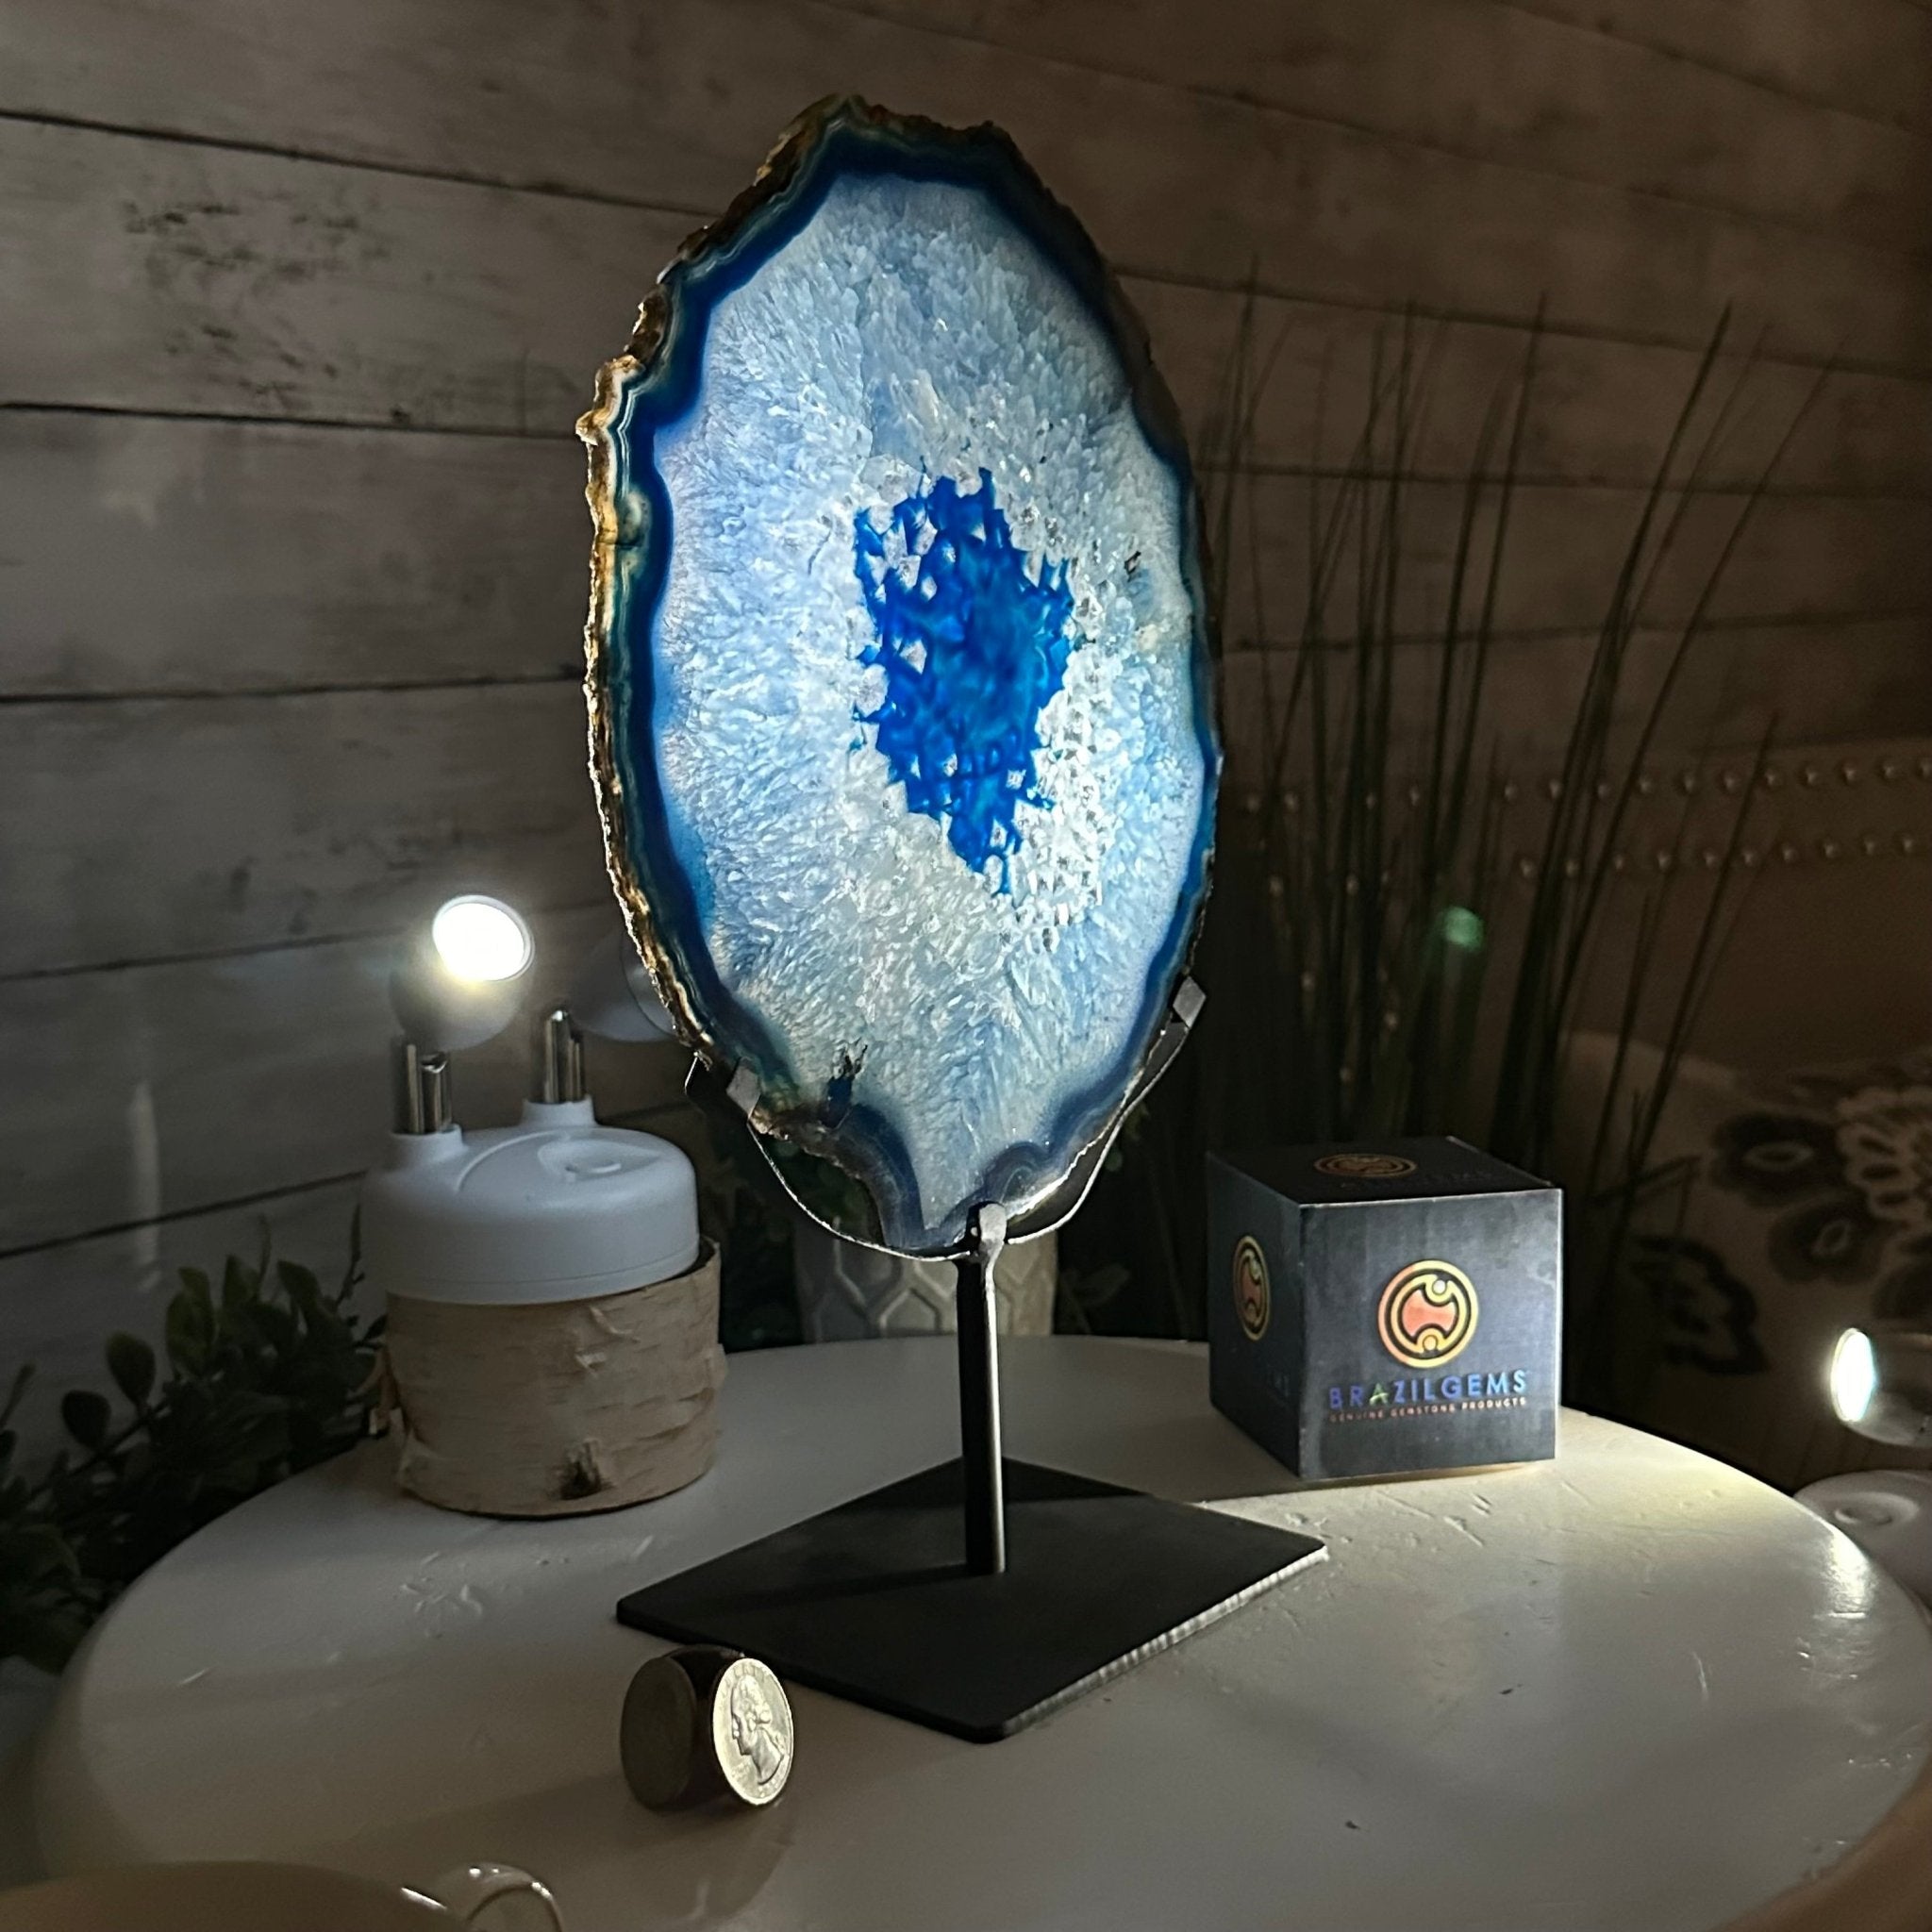 Brazilian Blue Agate Slice on a Metal Stand, 11.7" Tall #5055-0136 - Brazil GemsBrazil GemsBrazilian Blue Agate Slice on a Metal Stand, 11.7" Tall #5055-0136Slices on Fixed Bases5055-0136